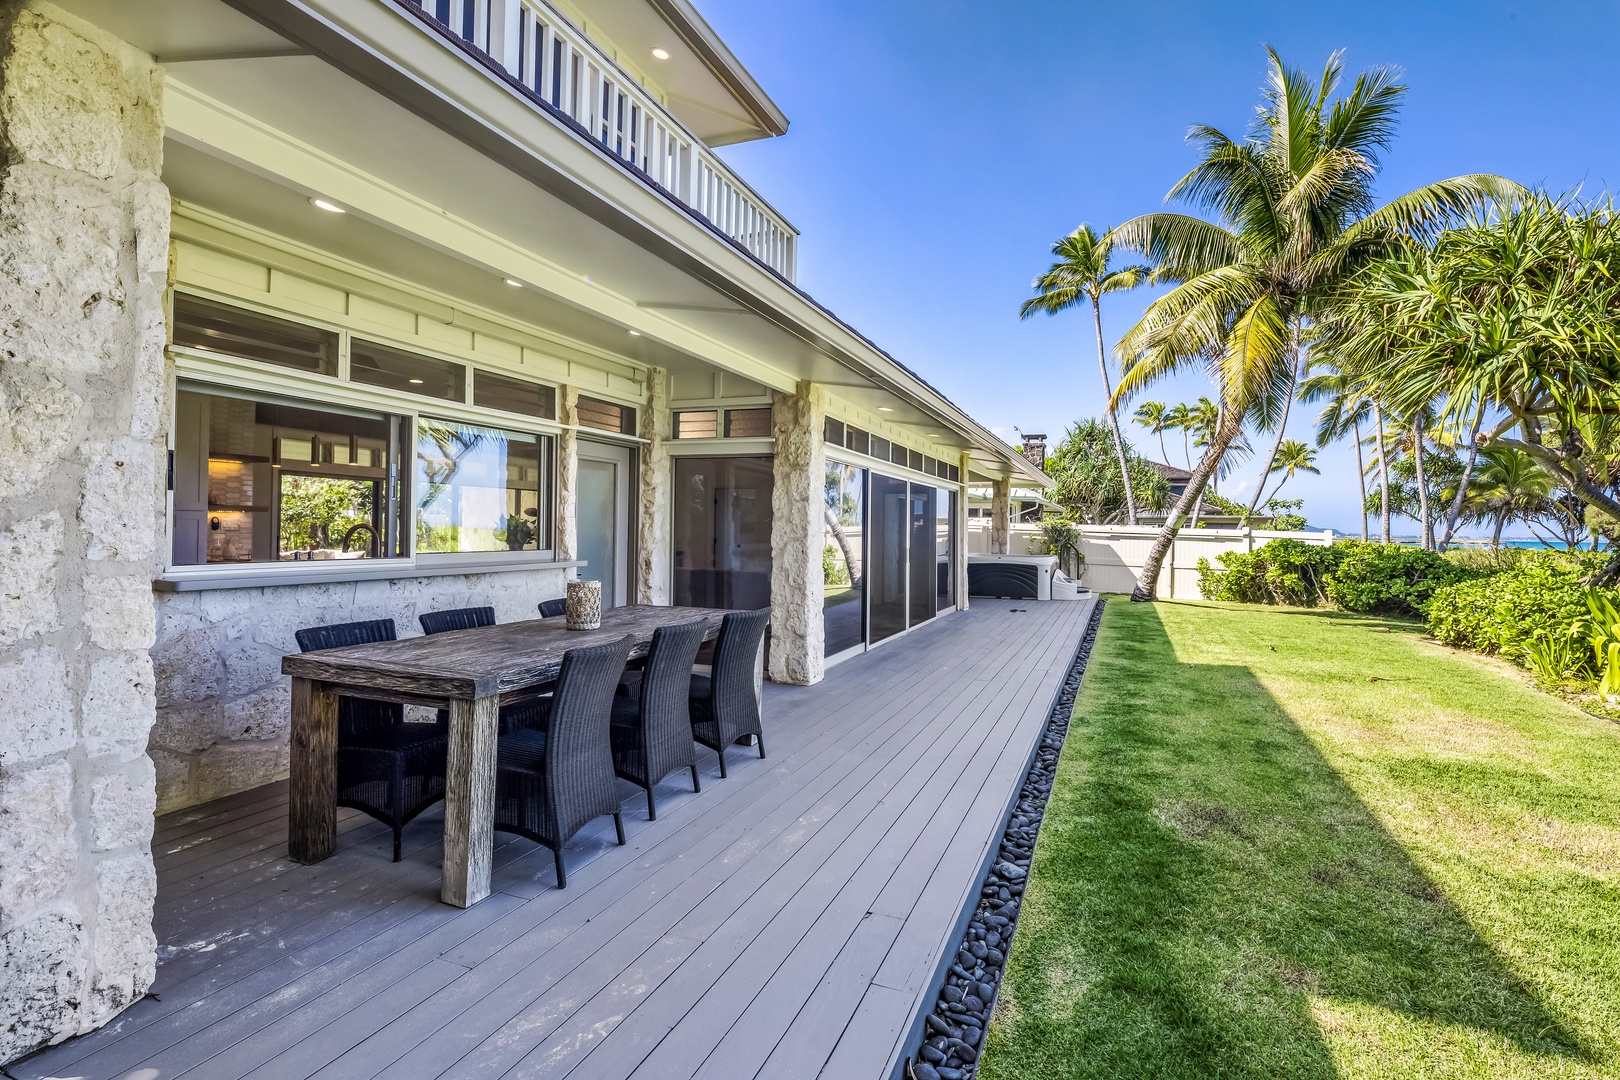 Kailua Vacation Rentals, Na Makana Villa - An outdoor dining space is also available on the ocean-facing lanai